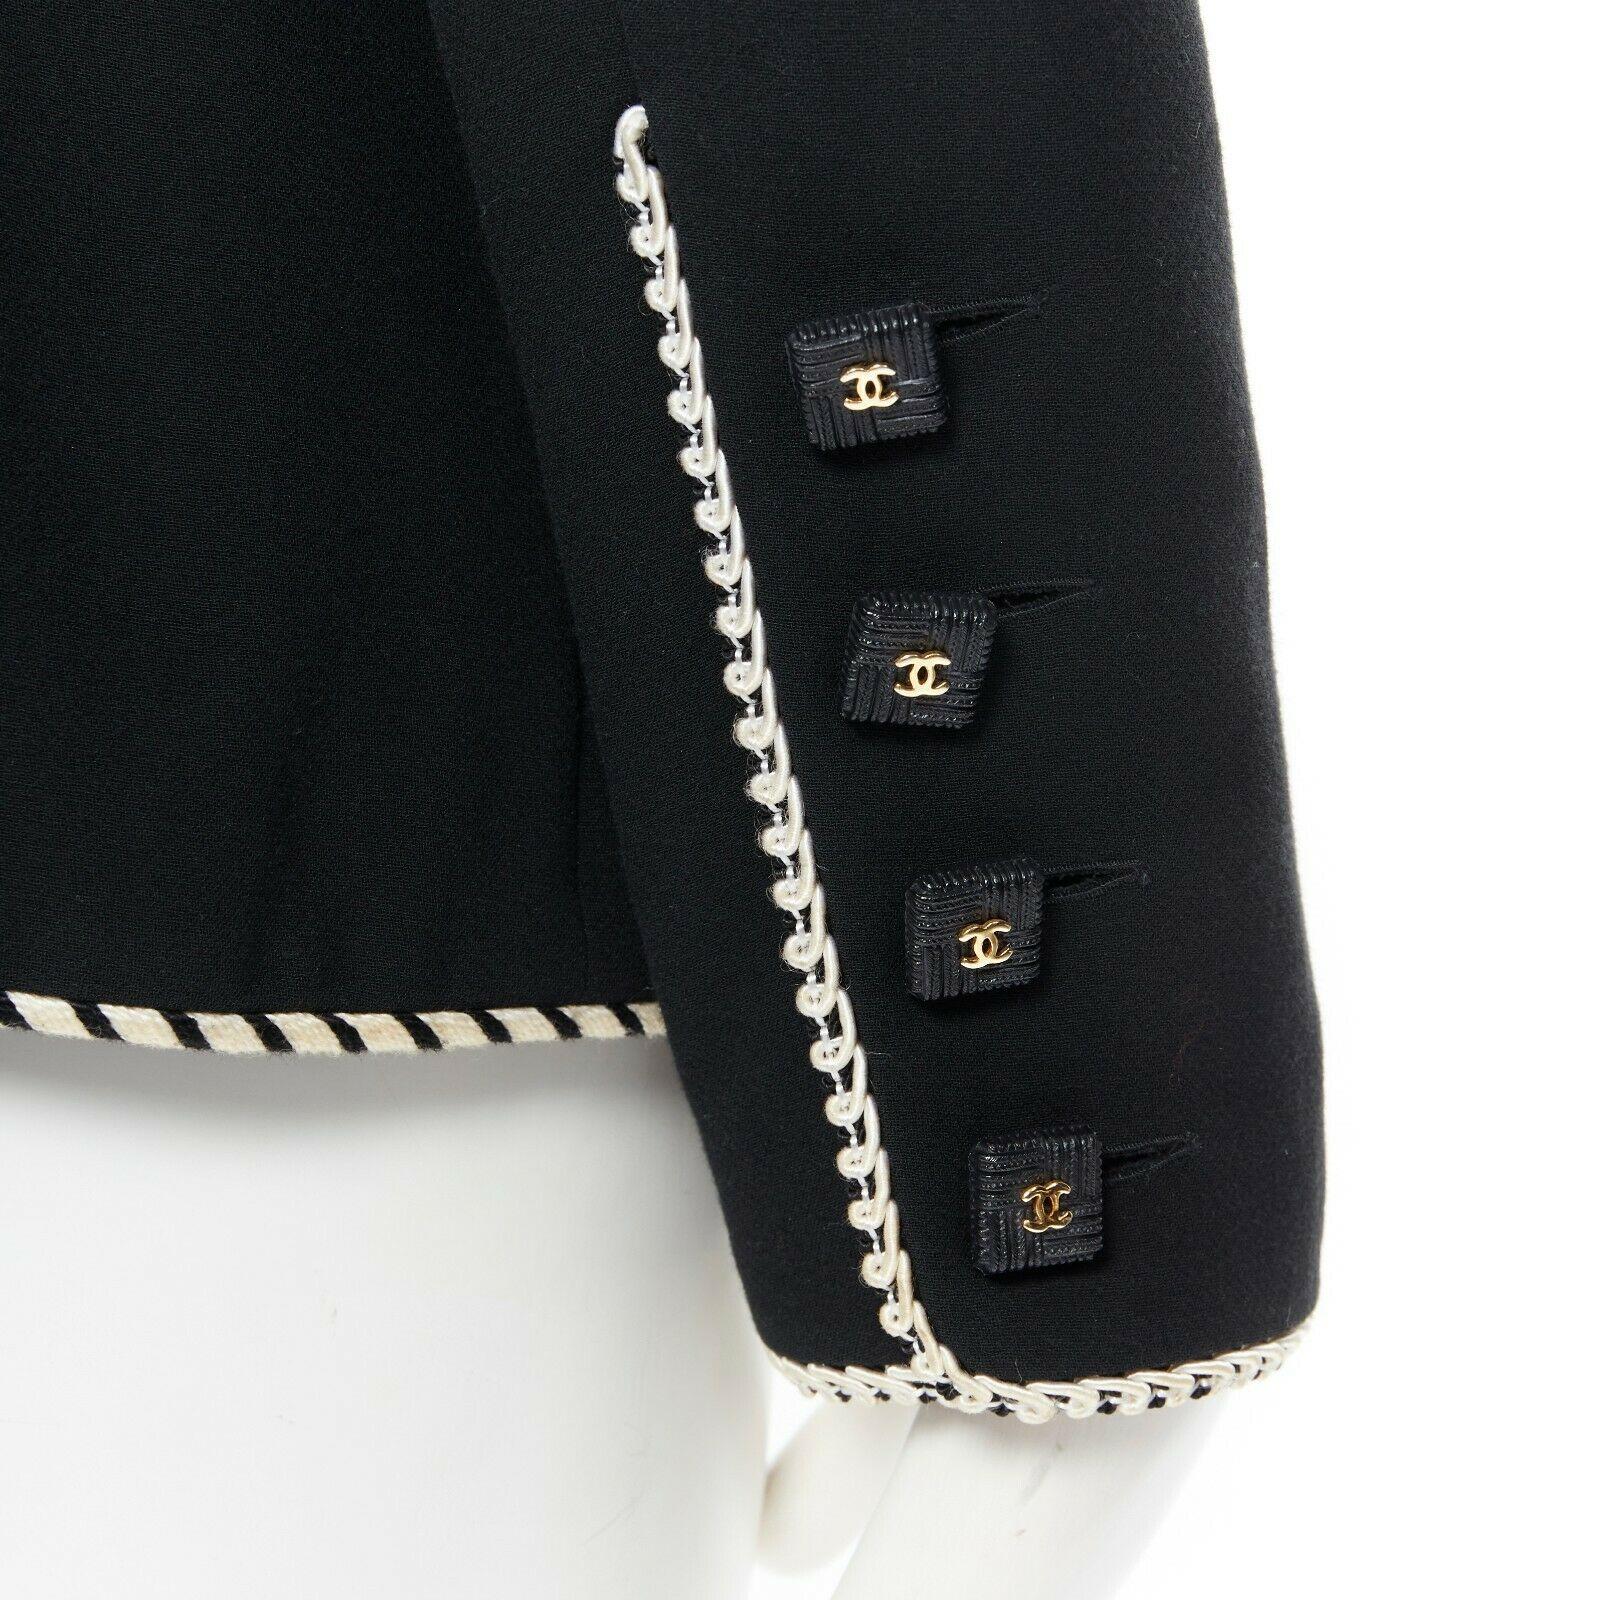 runway CHANEL 90P black nautical rope braid trim mandarin collar jacket FR42
Brand: CHANEL
Designer: Karl Lagerfeld
Collection: 90P
Model Name / Style: Nautical jacket
Material: Other; composition label removed. Feels like cotton.
Color: Black and